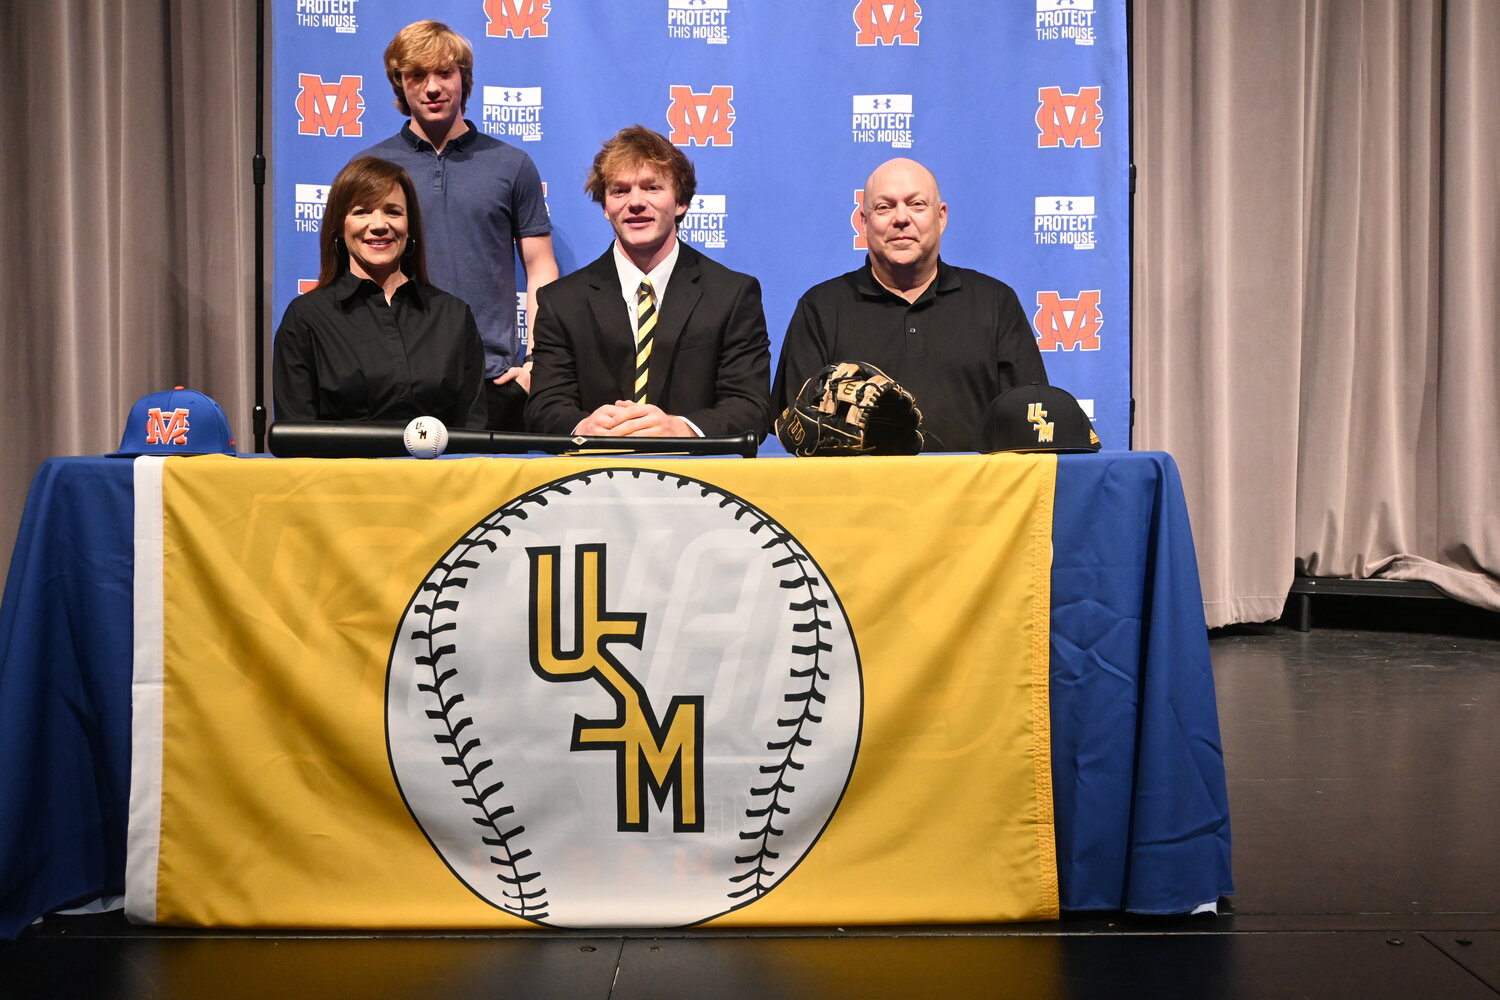 Madison Central High School senior Chase Russell signed a national letter of intent to play baseball at the University of Southern Mississippi. Pictured left to right are Dawn Russell (mom), Russell, and Dale Russell (dad). Standing is Rhett Russell (brother).